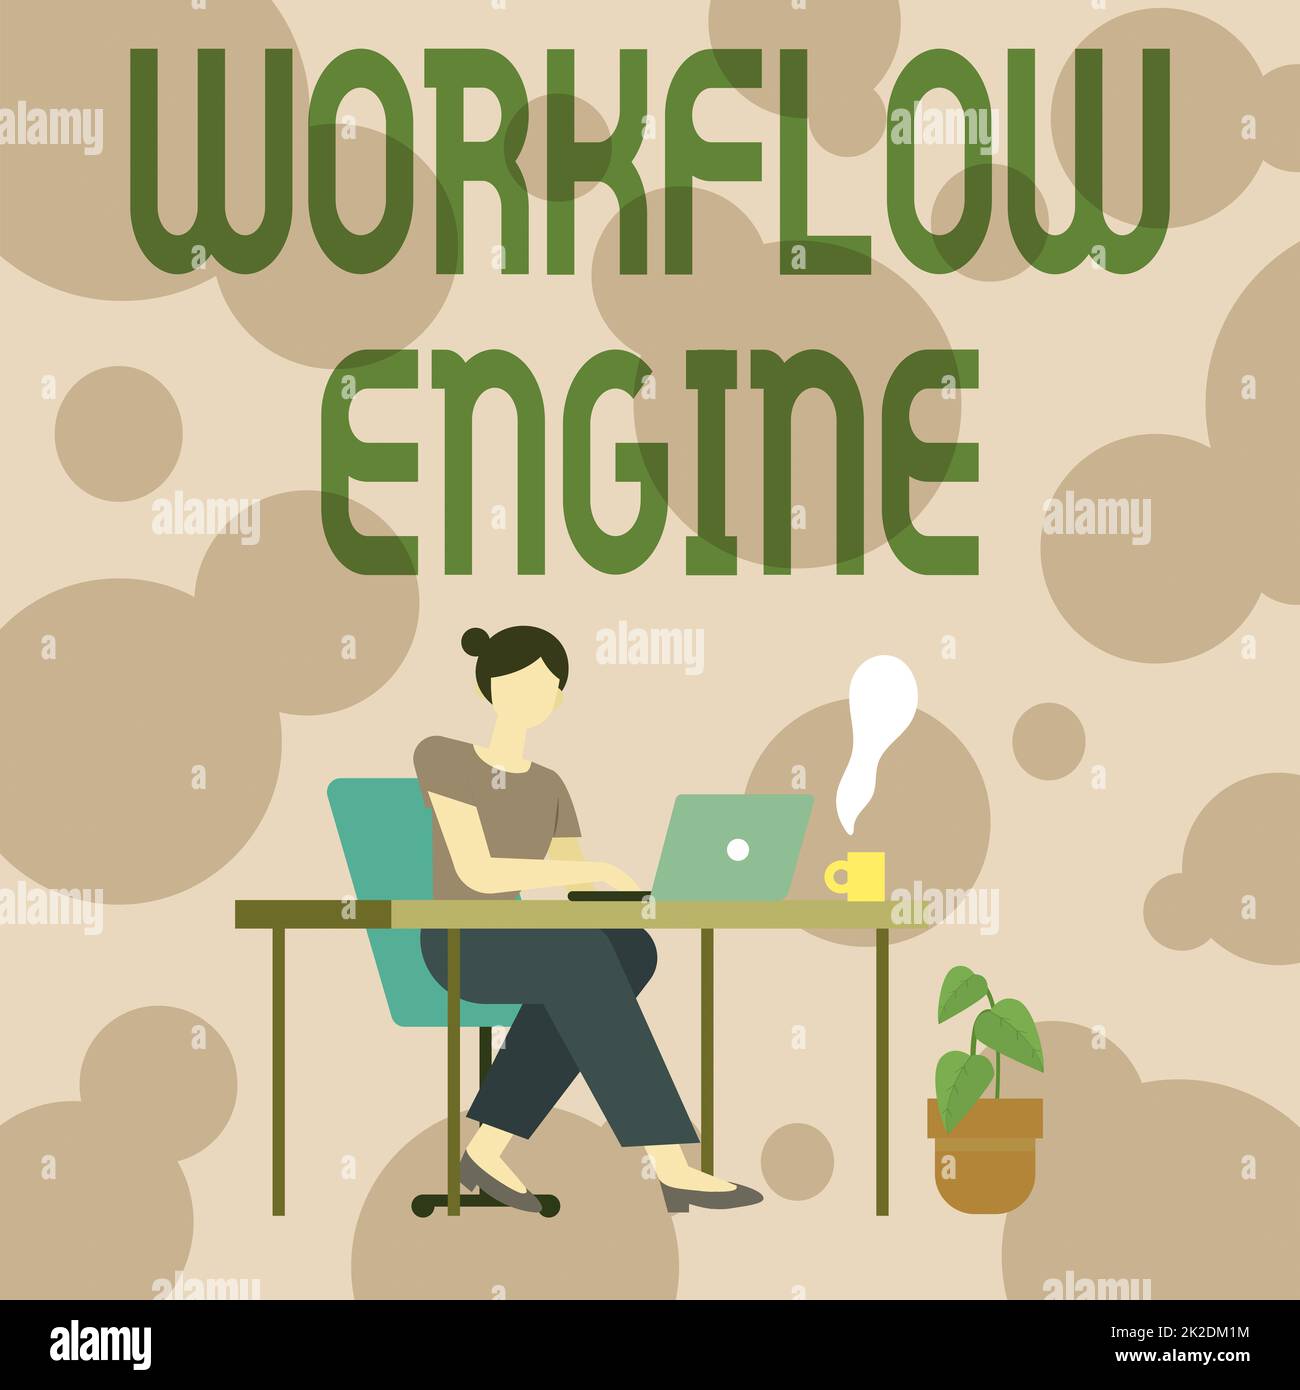 Inspiration showing sign Workflow Engine. Word for Workflow Engine Woman Sitting With Laptop Back View Actively Accomplishing Work From Home Stock Photo